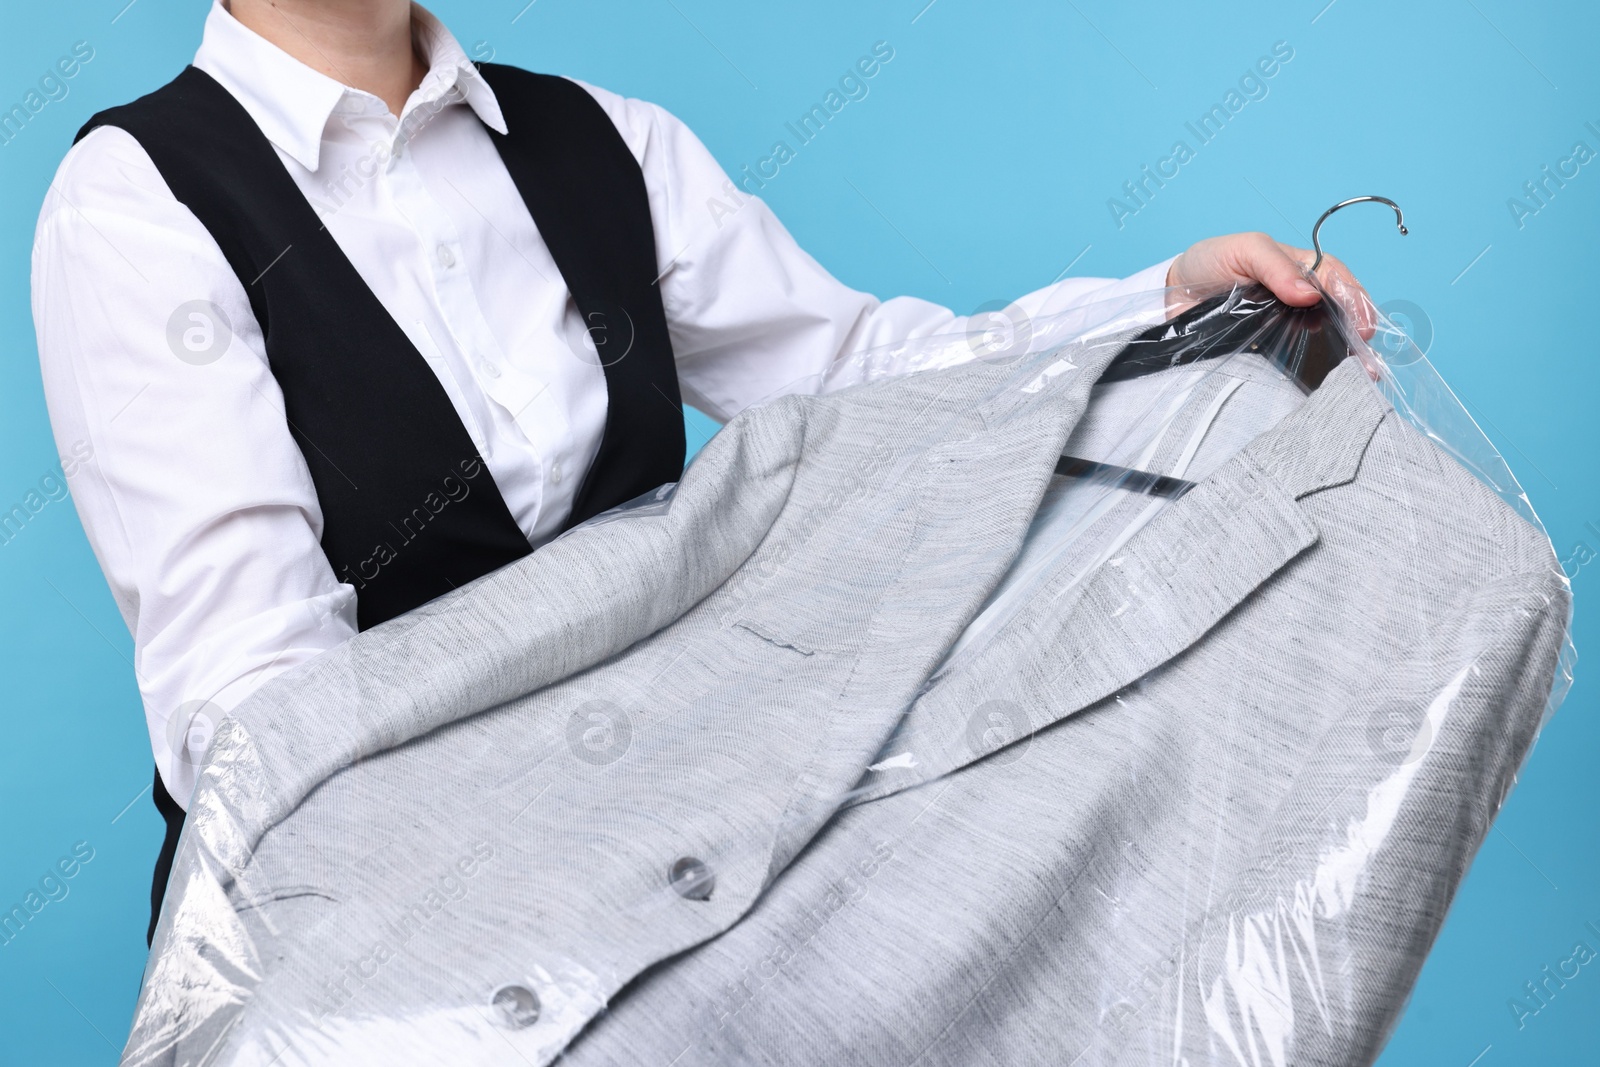 Photo of Dry-cleaning service. Woman holding jacket in plastic bag on light blue background, closeup